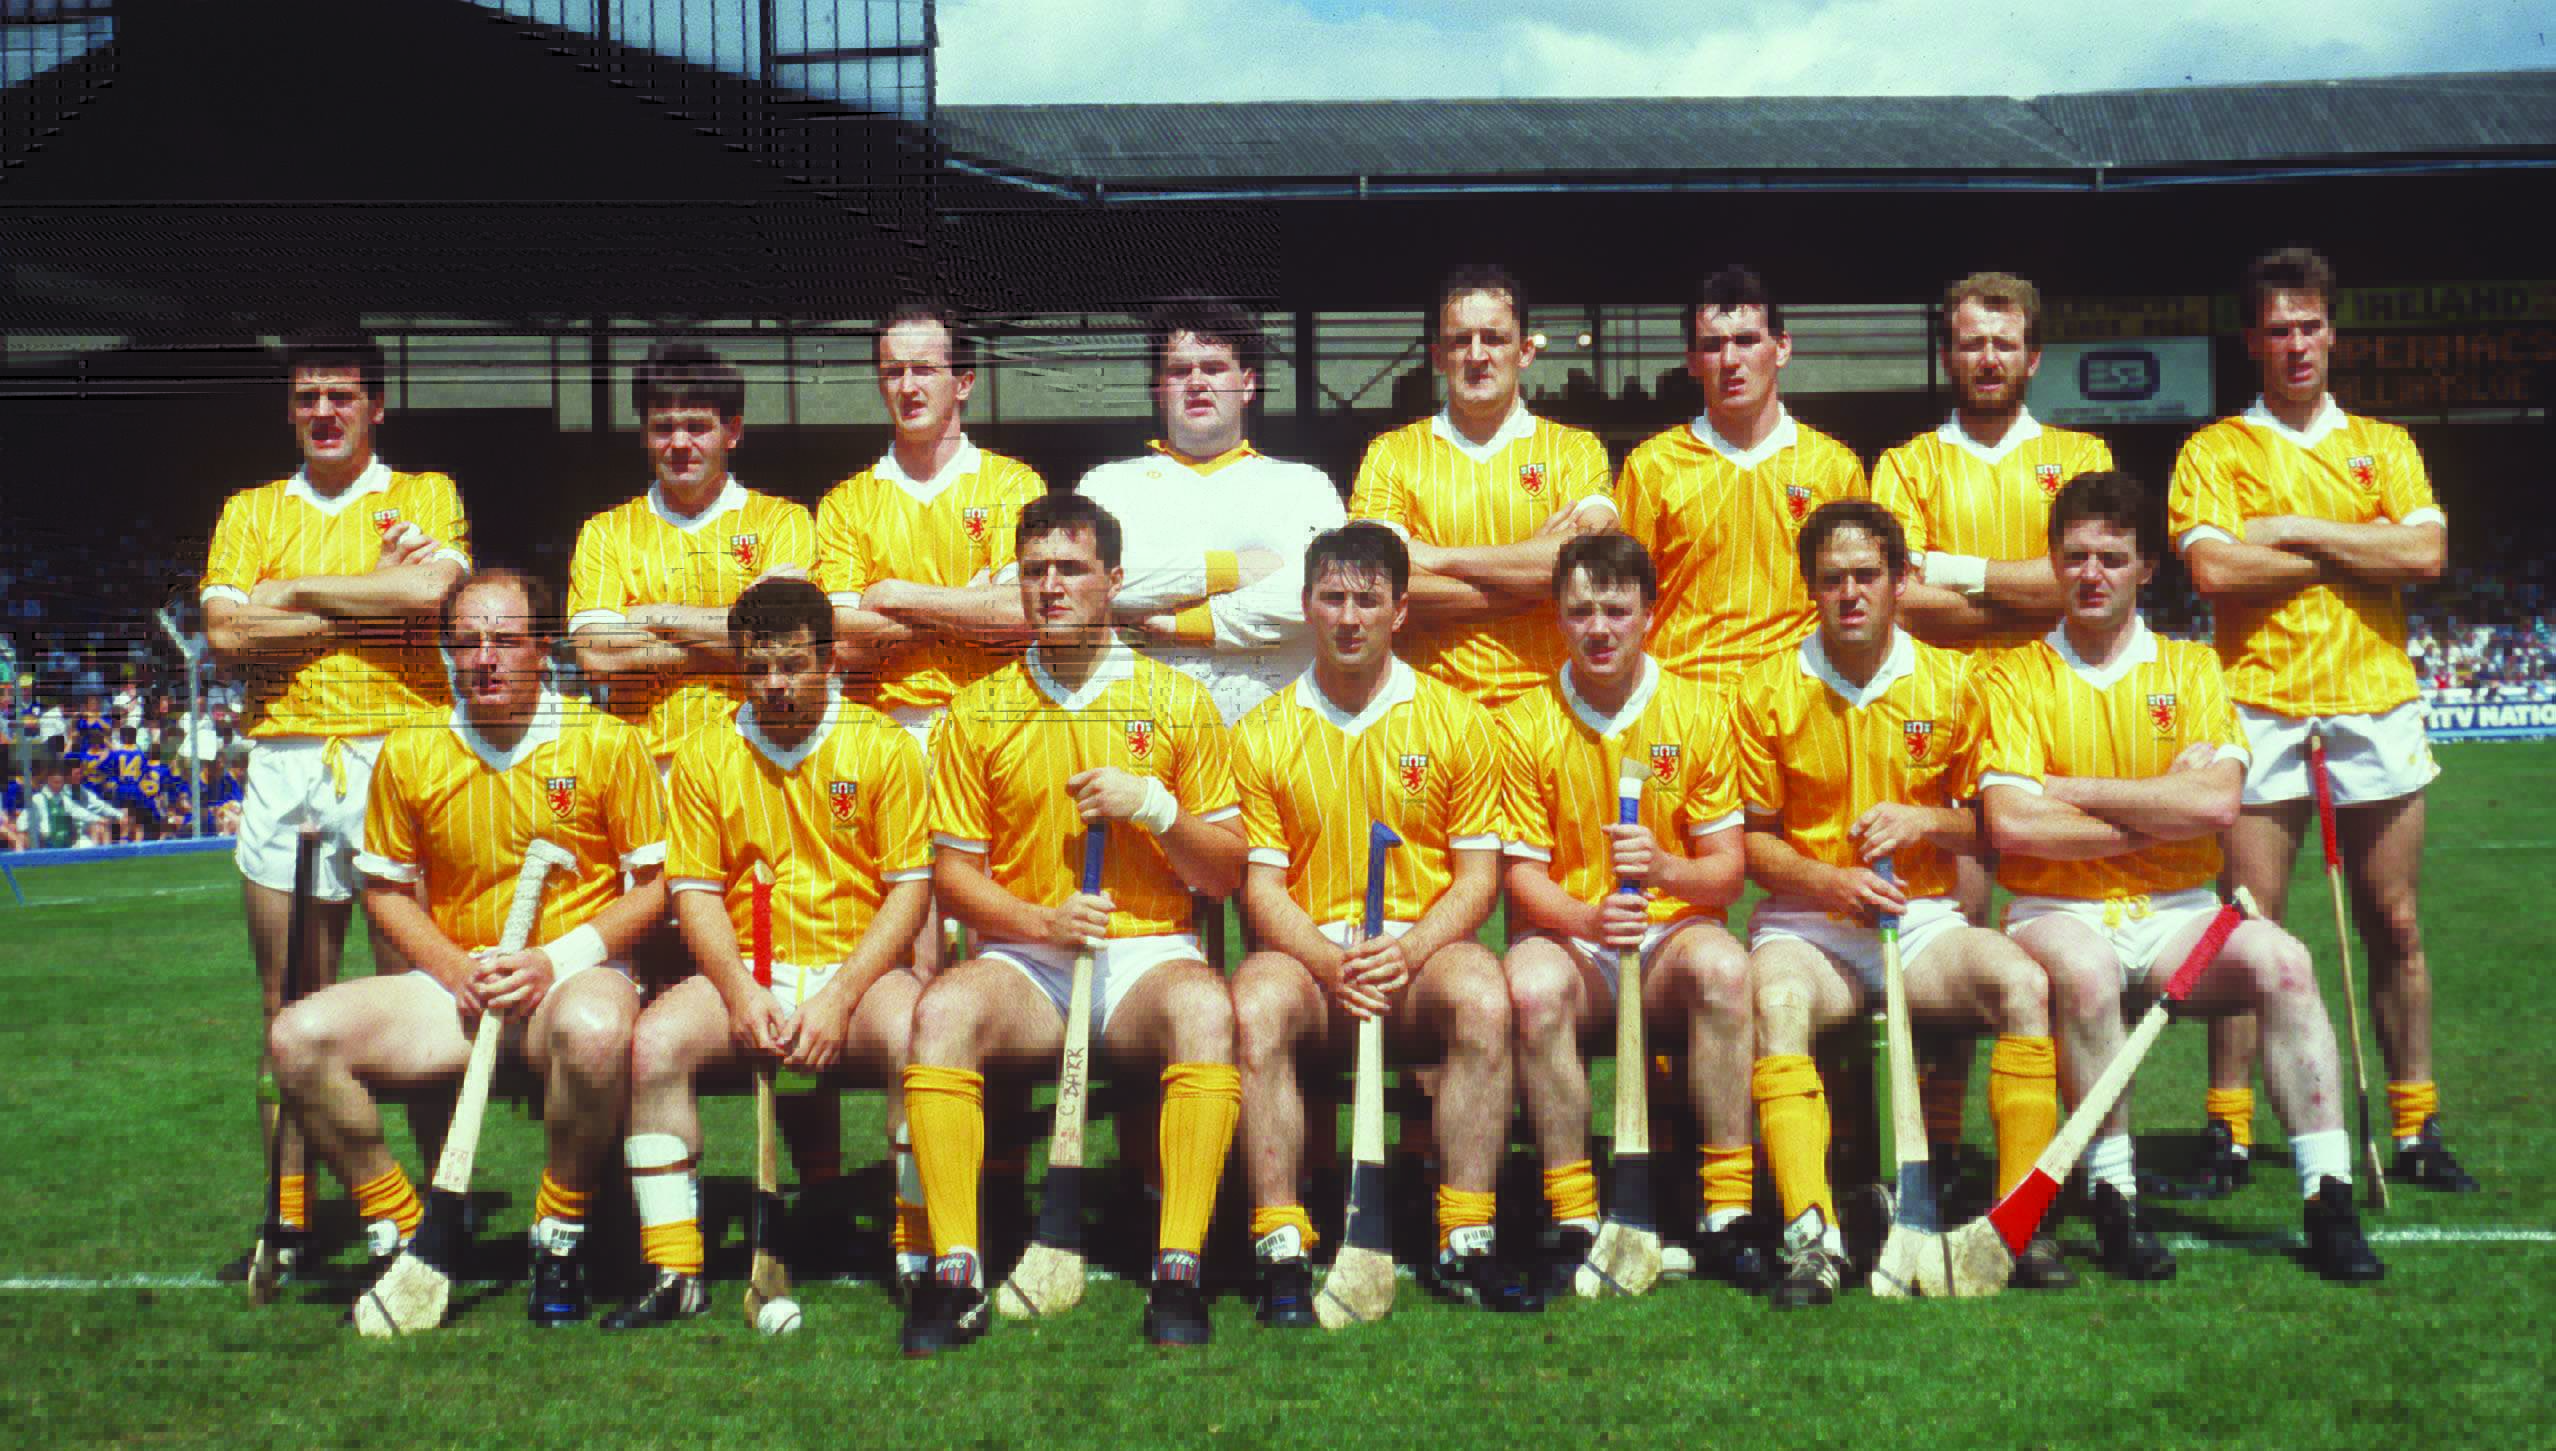 The Antrim time line out before the 1989 All-Ireland semi-final in Croke Park